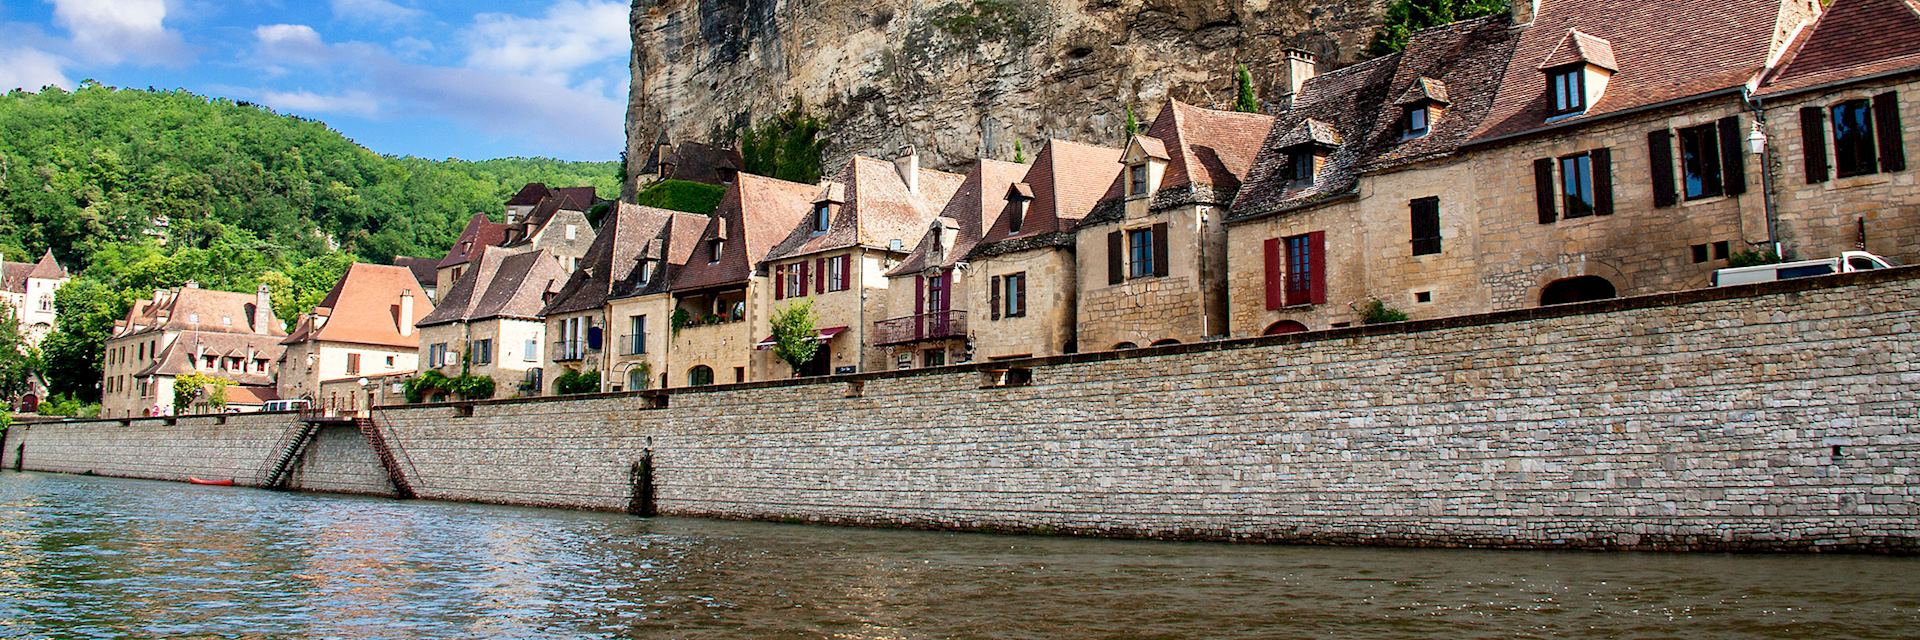 La Roque-Gageac Vacations | Tailor-Made La Roque-Gageac Tours | Audley Travel US